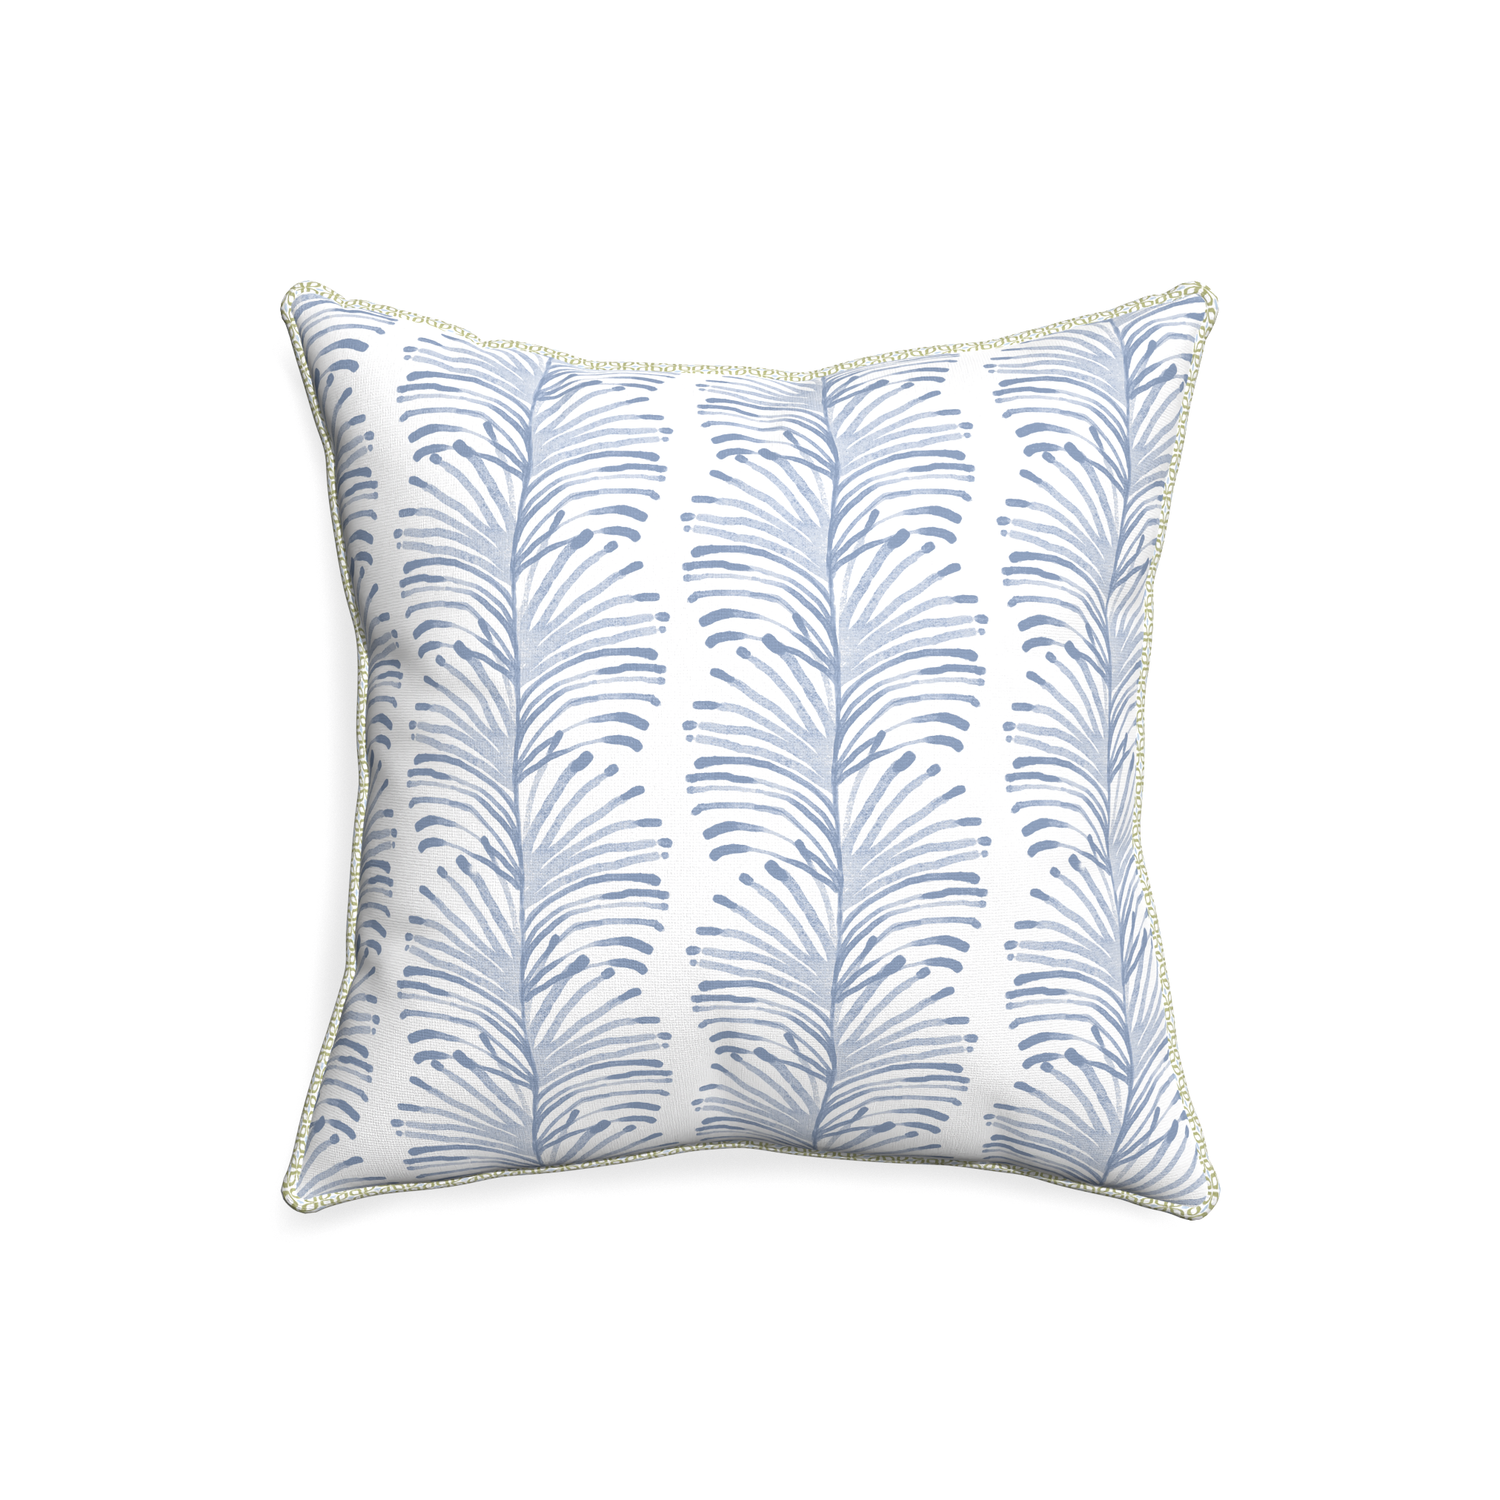 20-square emma sky custom sky blue botanical stripepillow with l piping on white background